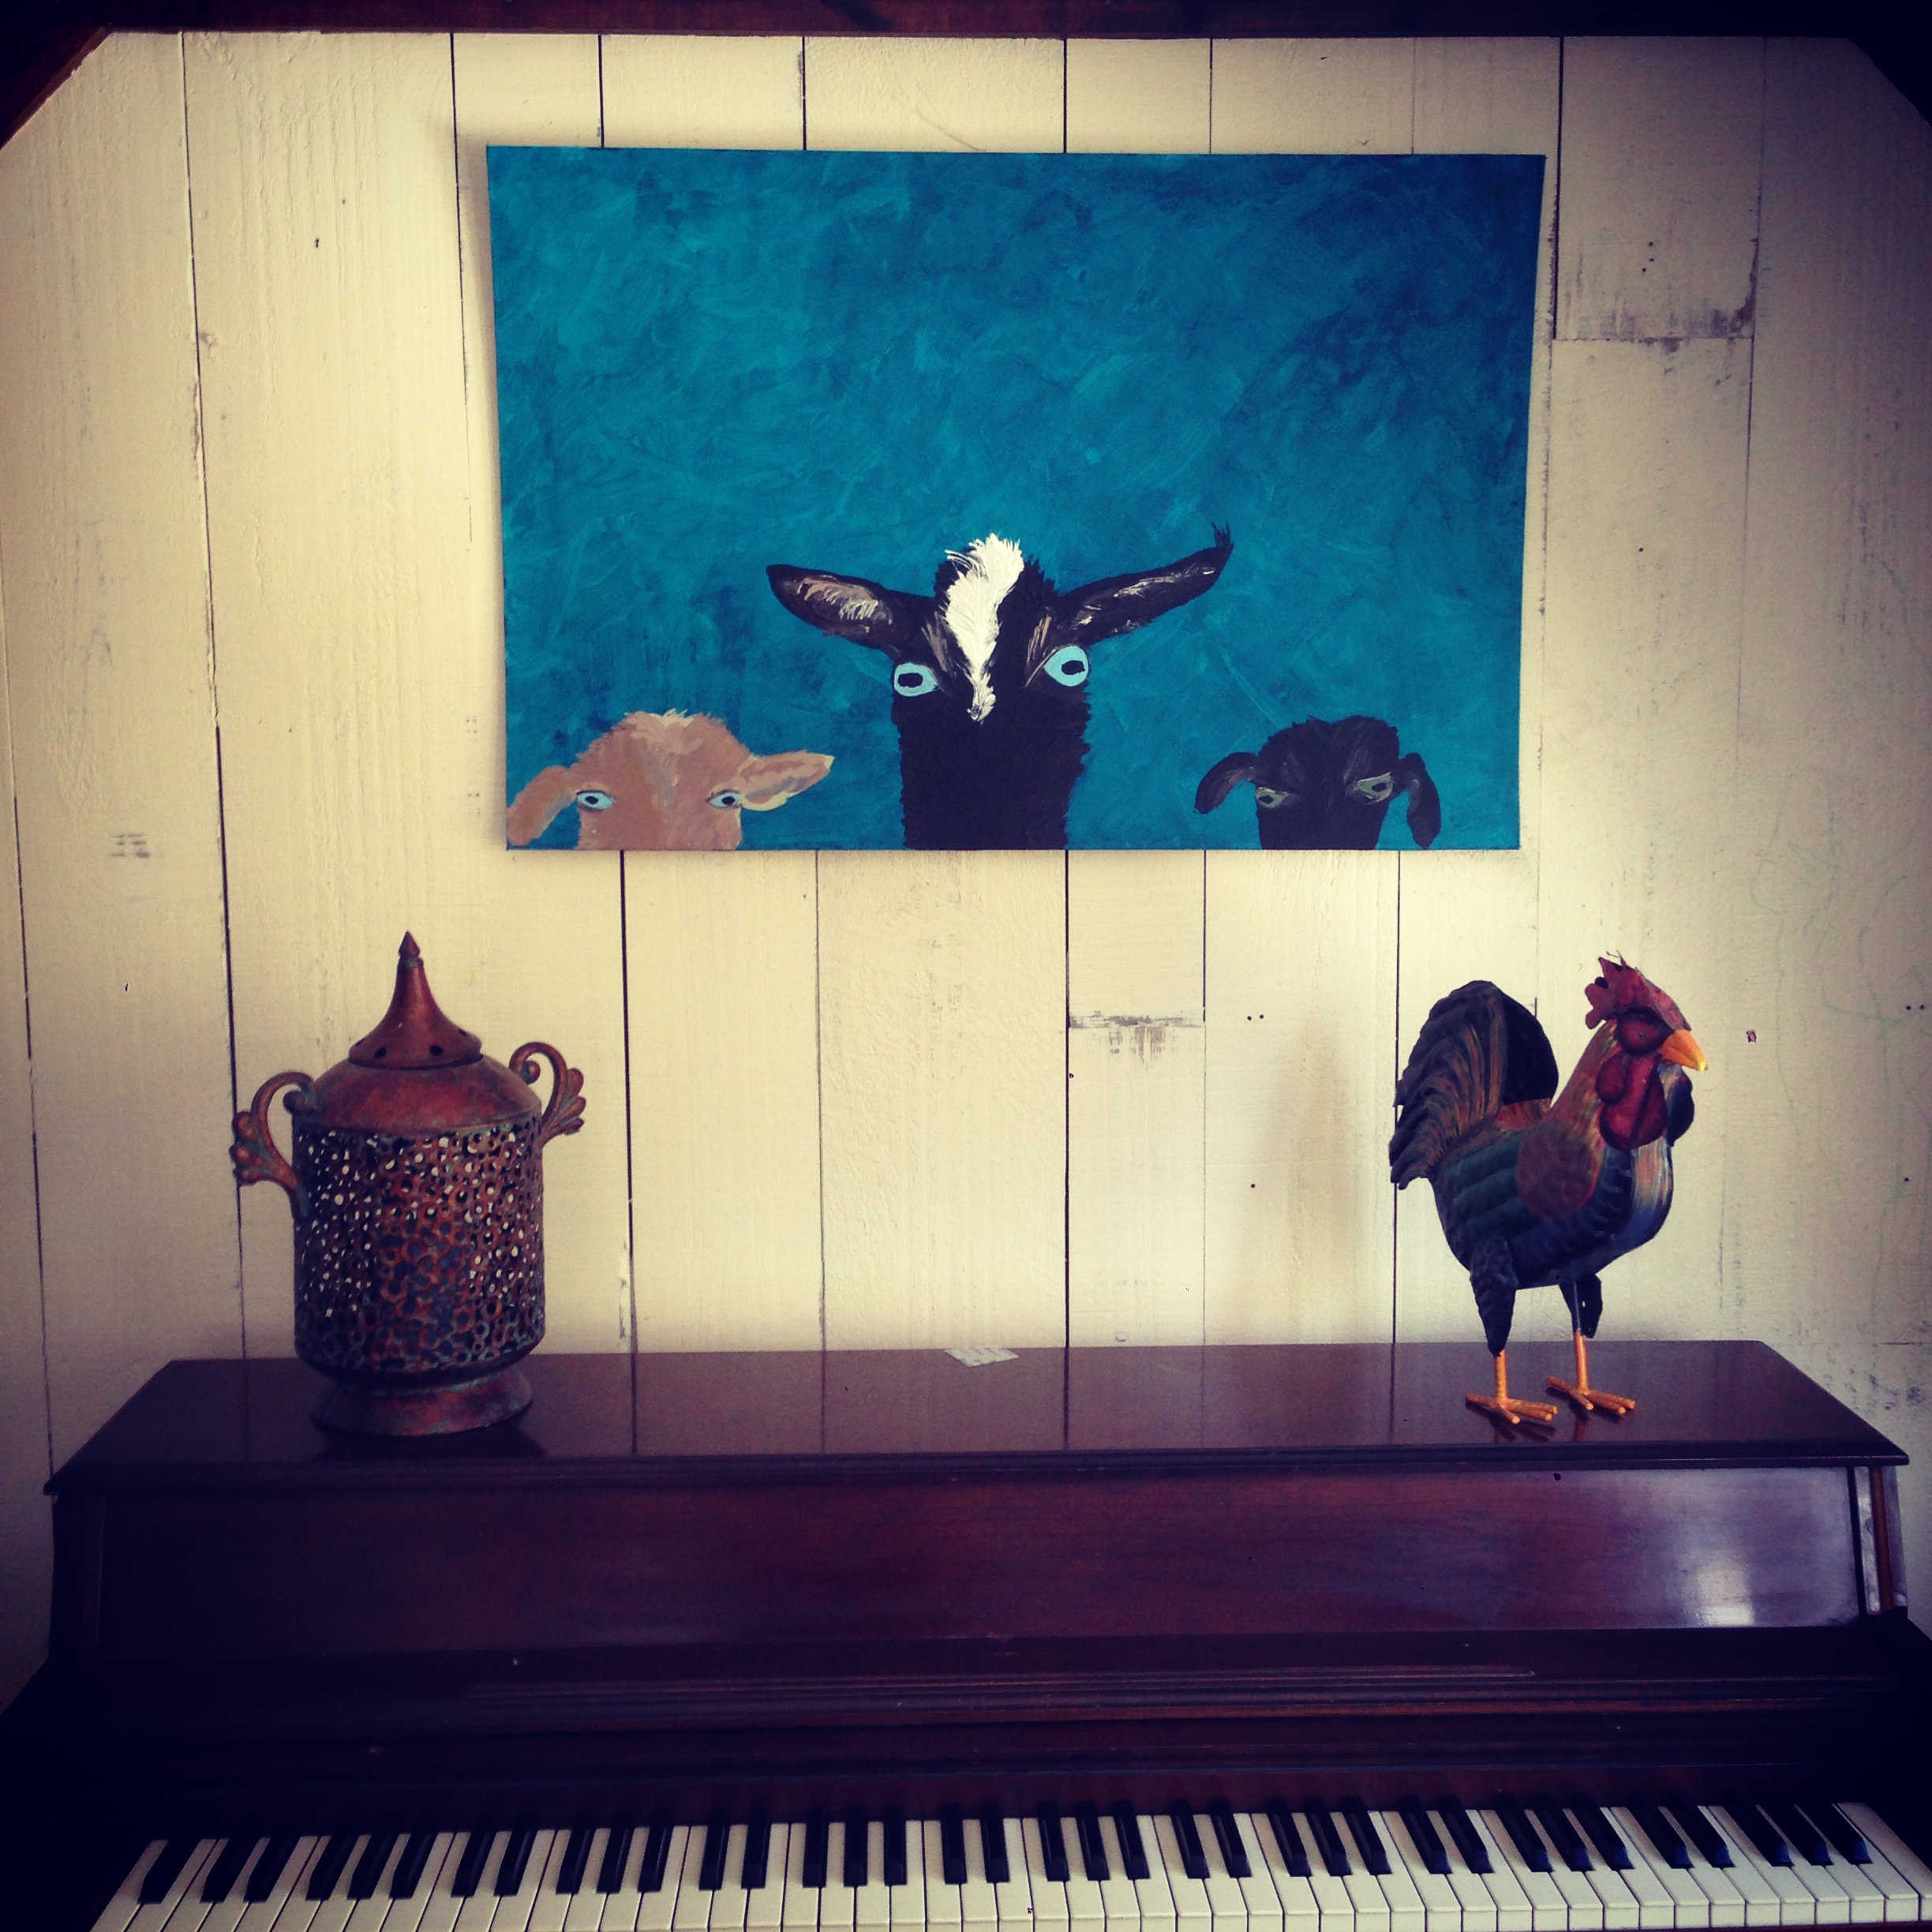 a painting of 3 nigerian dwarf goats against a blue backround hung above a piano